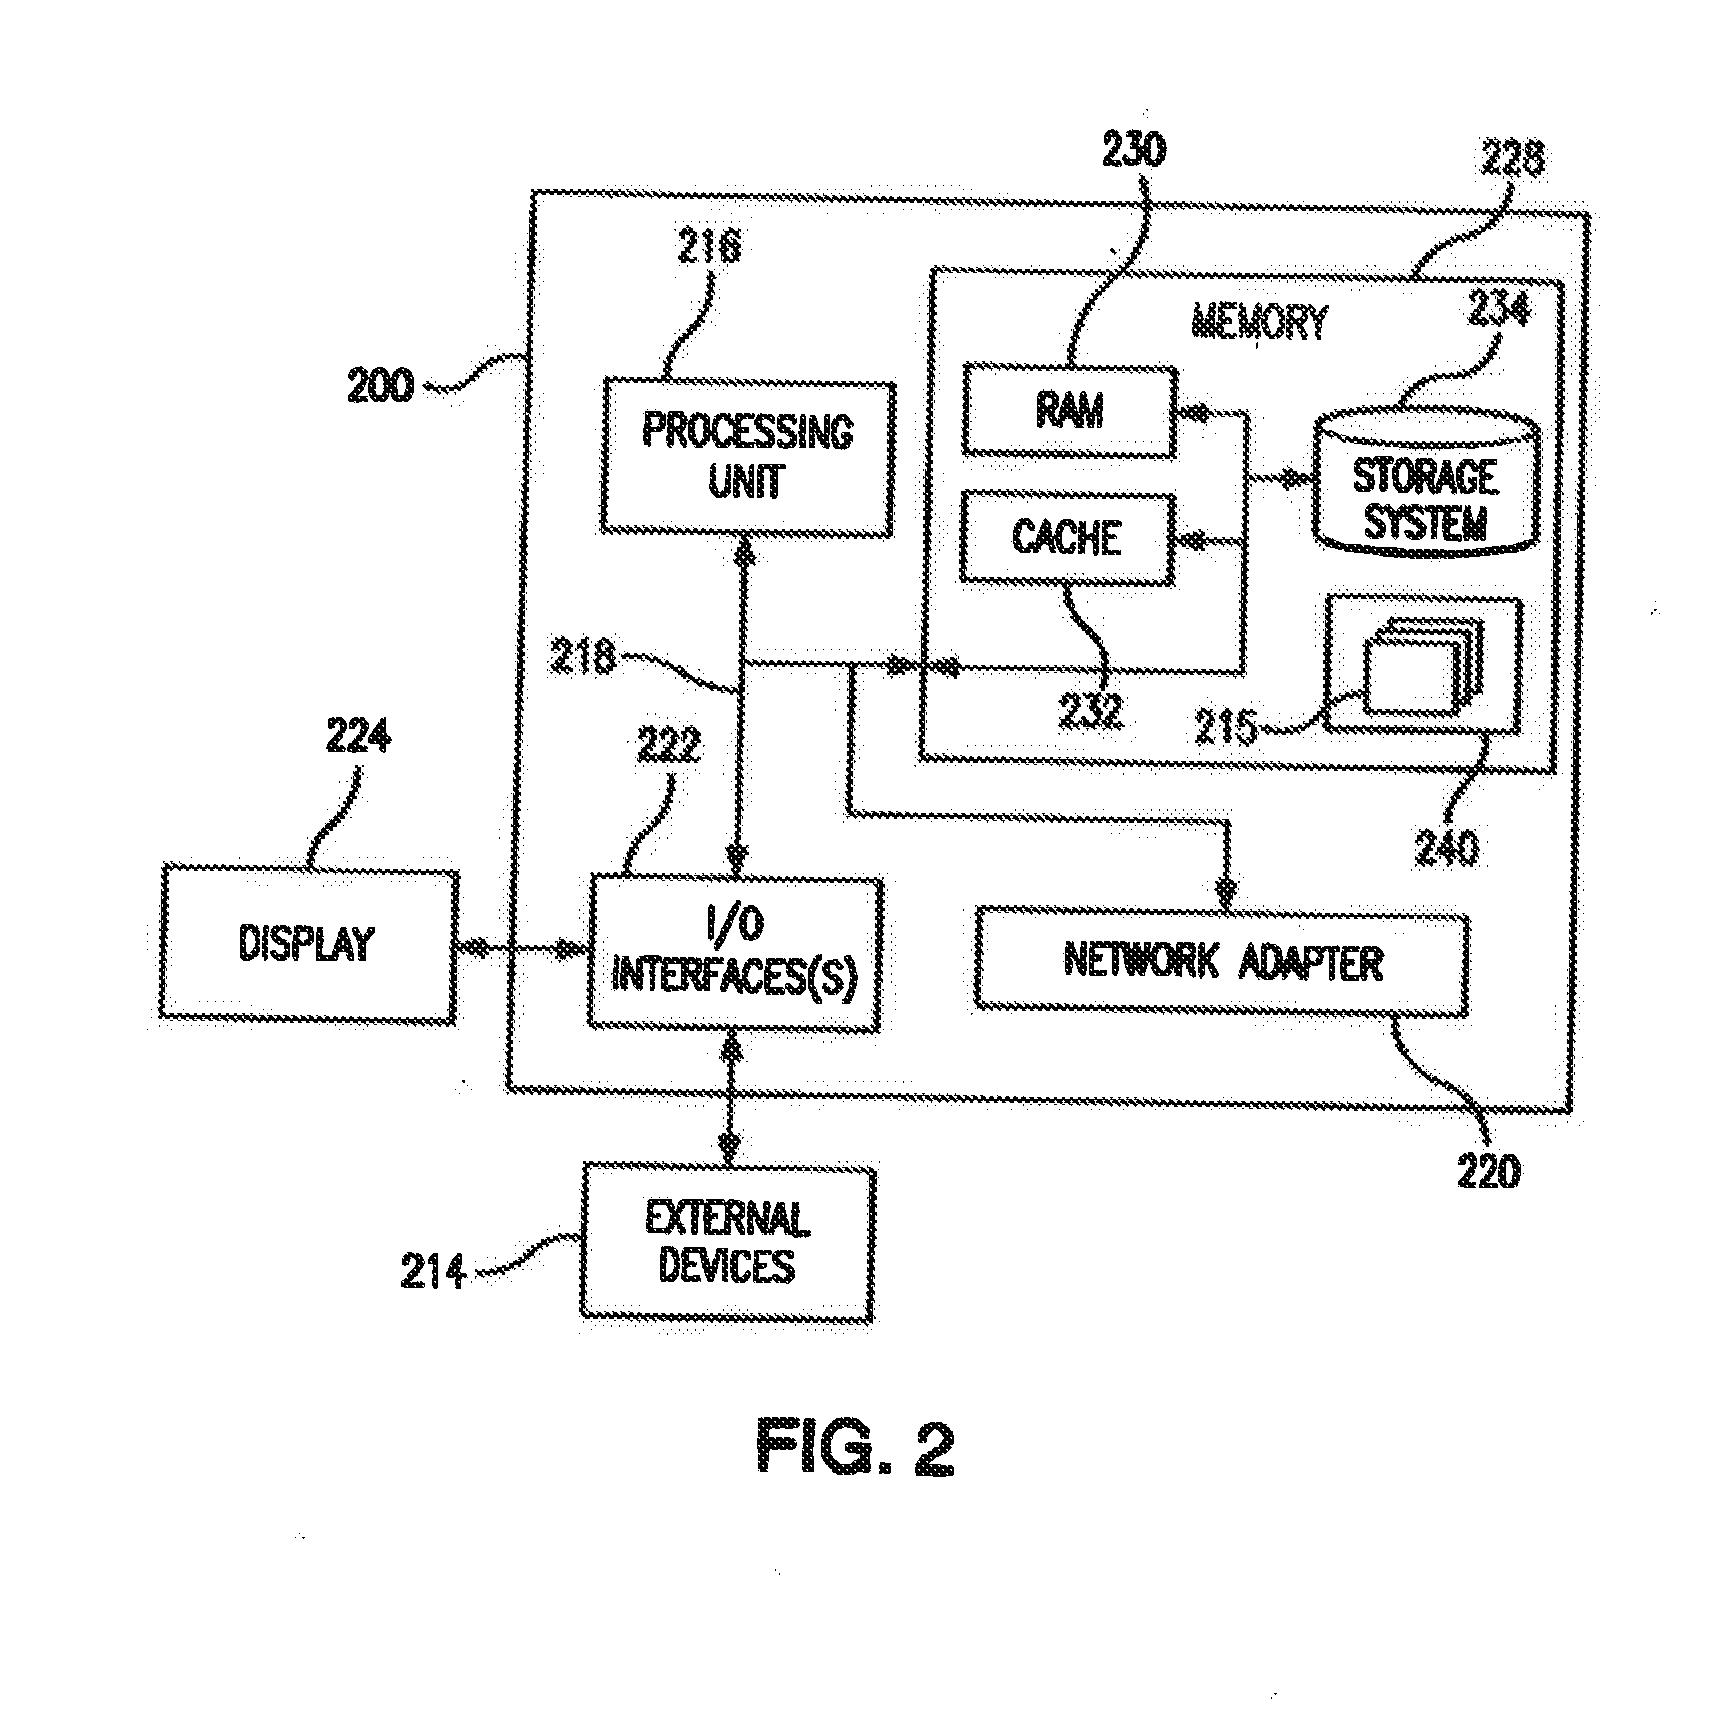 System and method for performing dwelling maintenance analytics on insured property